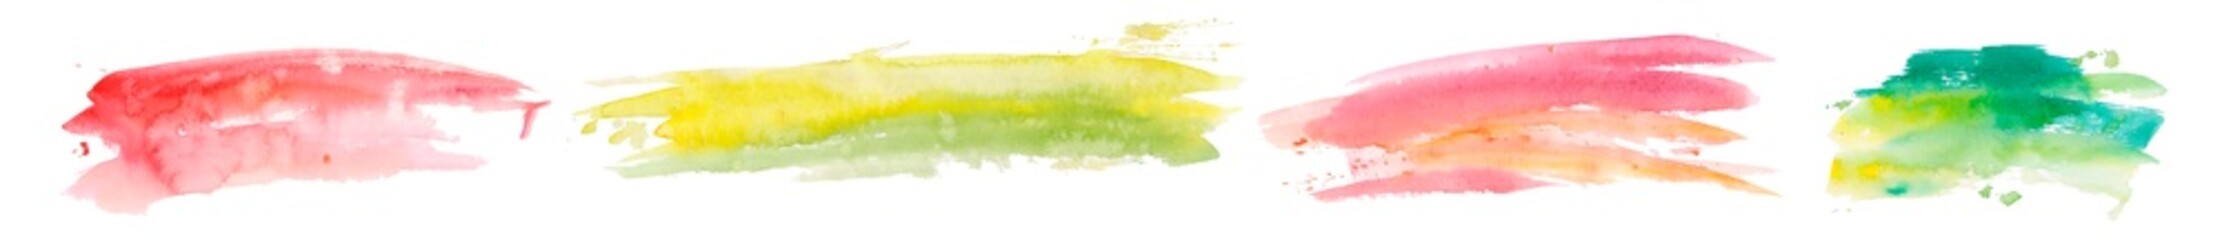 Rainbow watercolor stains set on white background